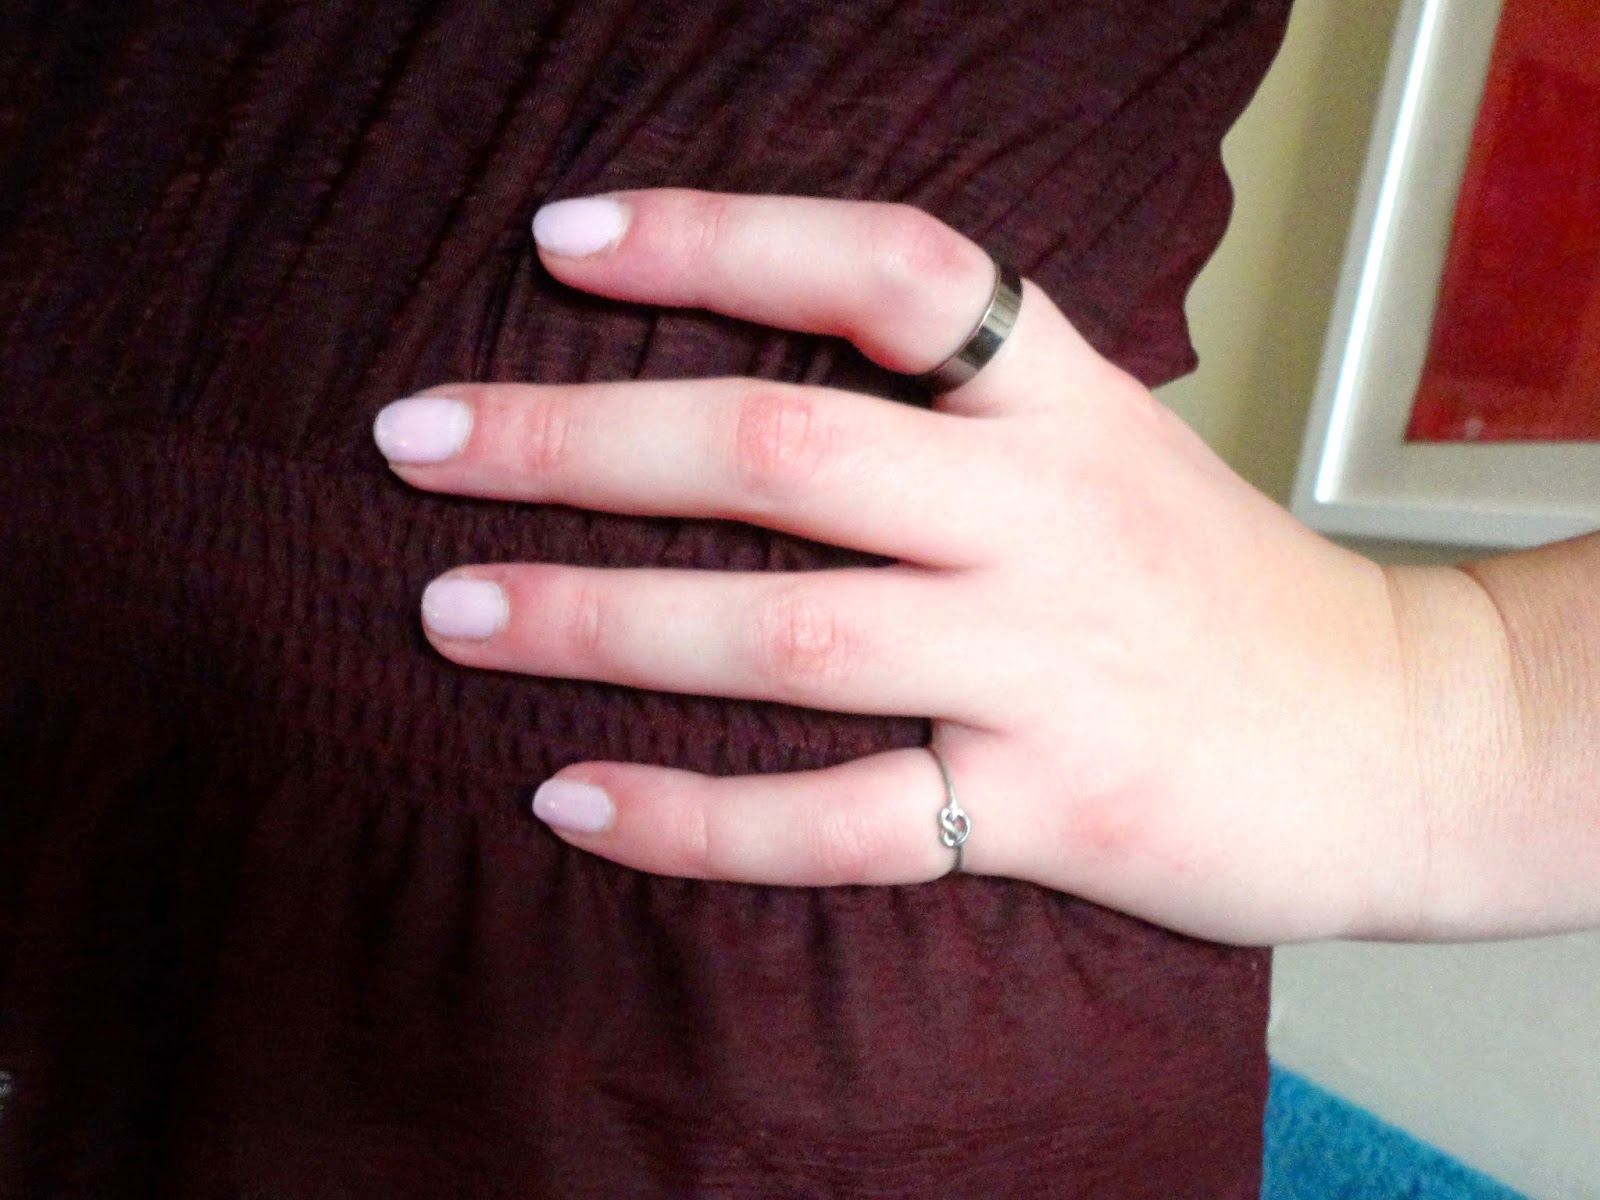 black and silver rings, pink nail polish with deep red peplum top